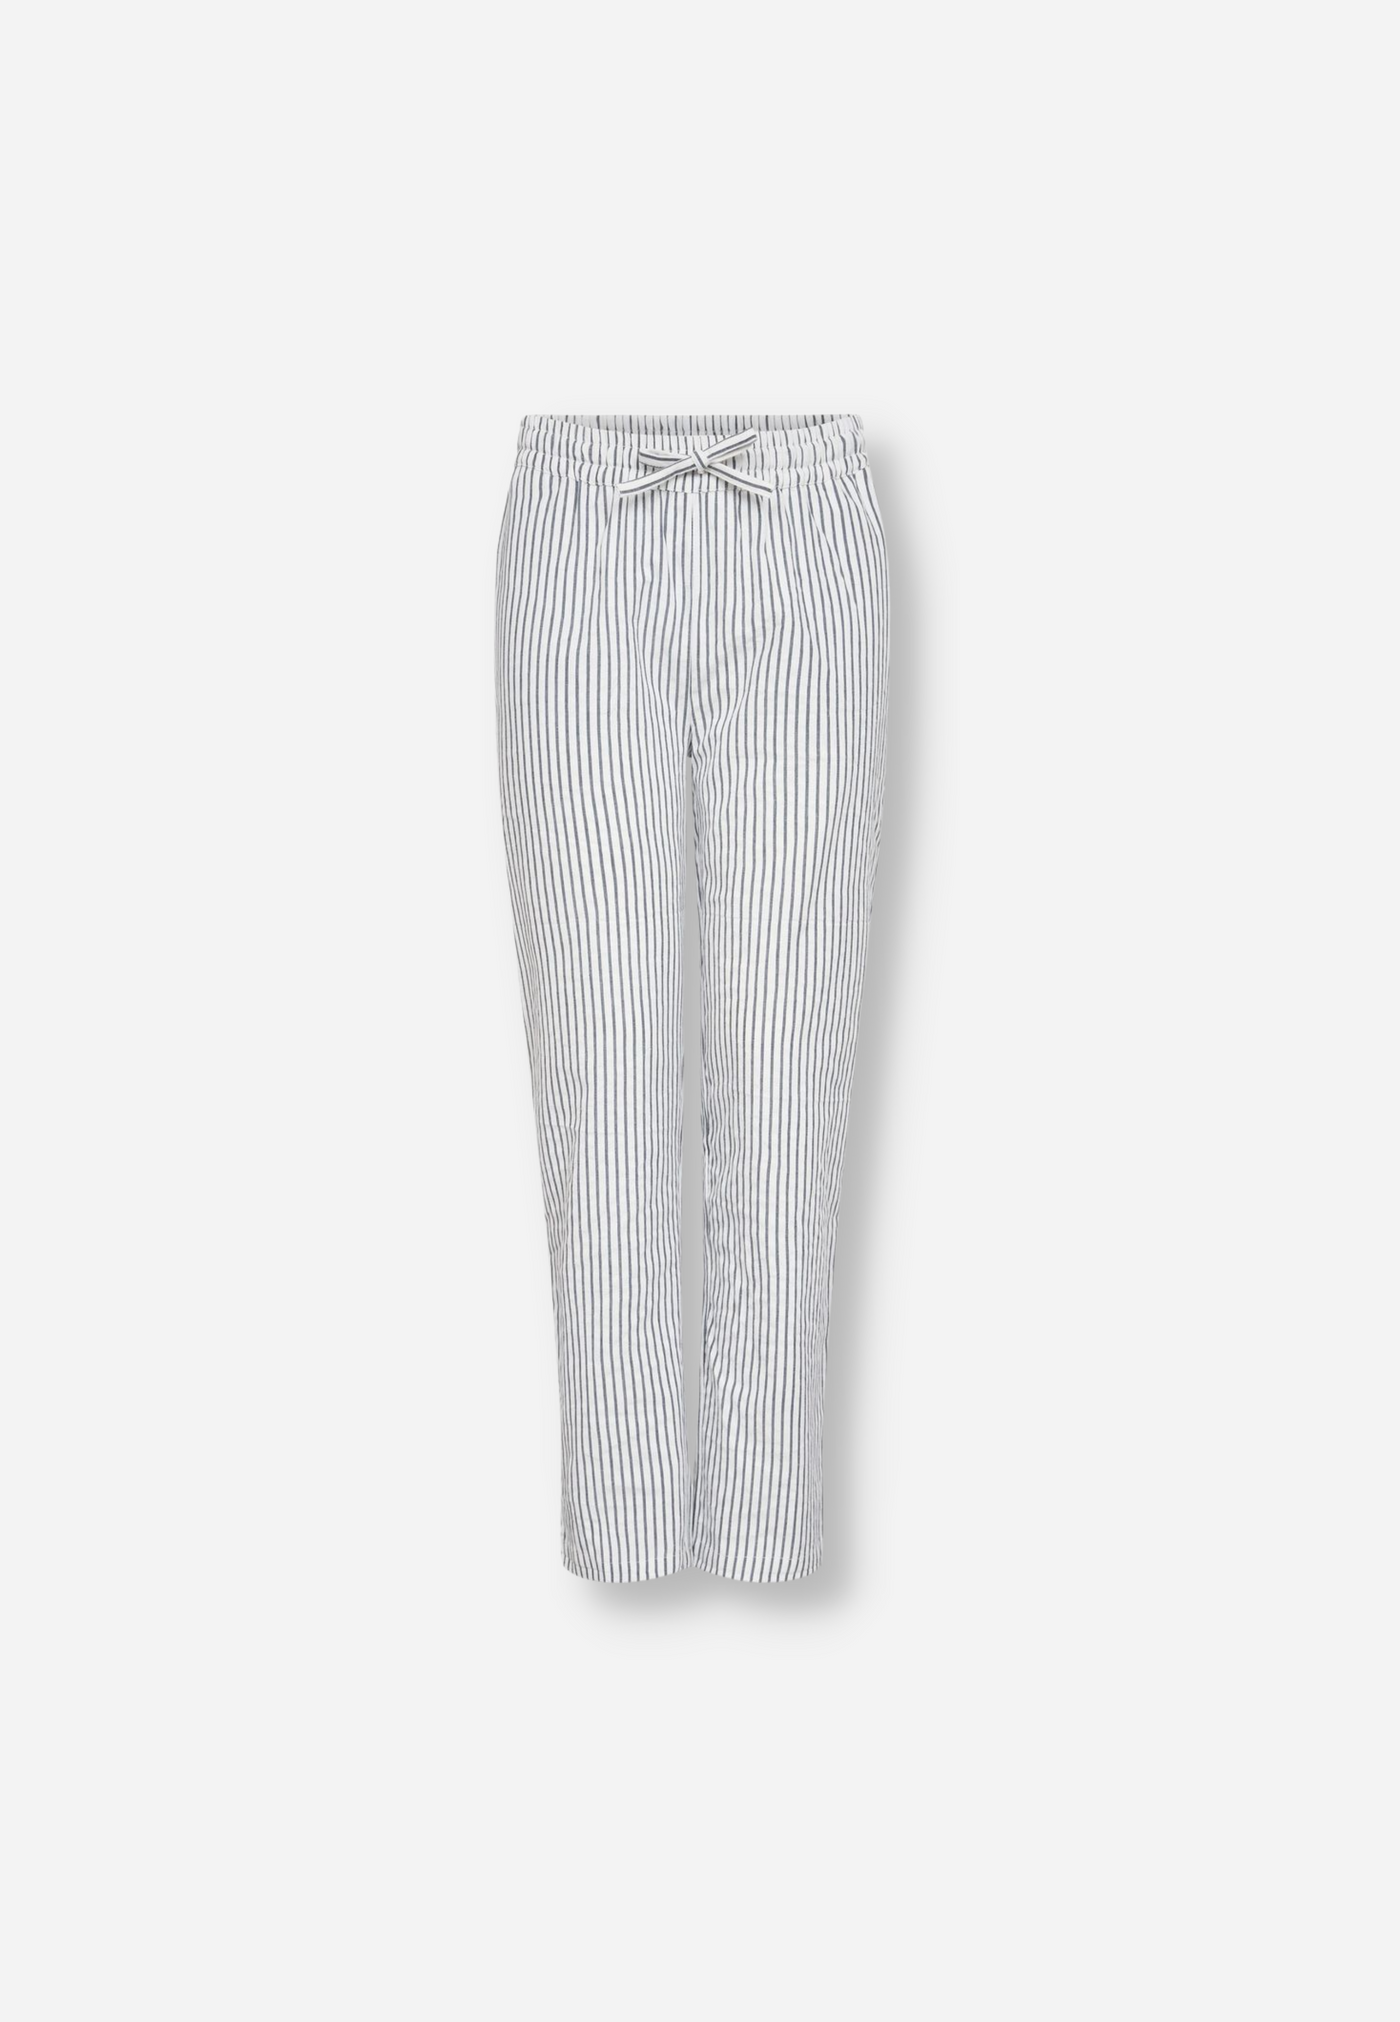 TROUSERS - OFF WHITE STRIPED